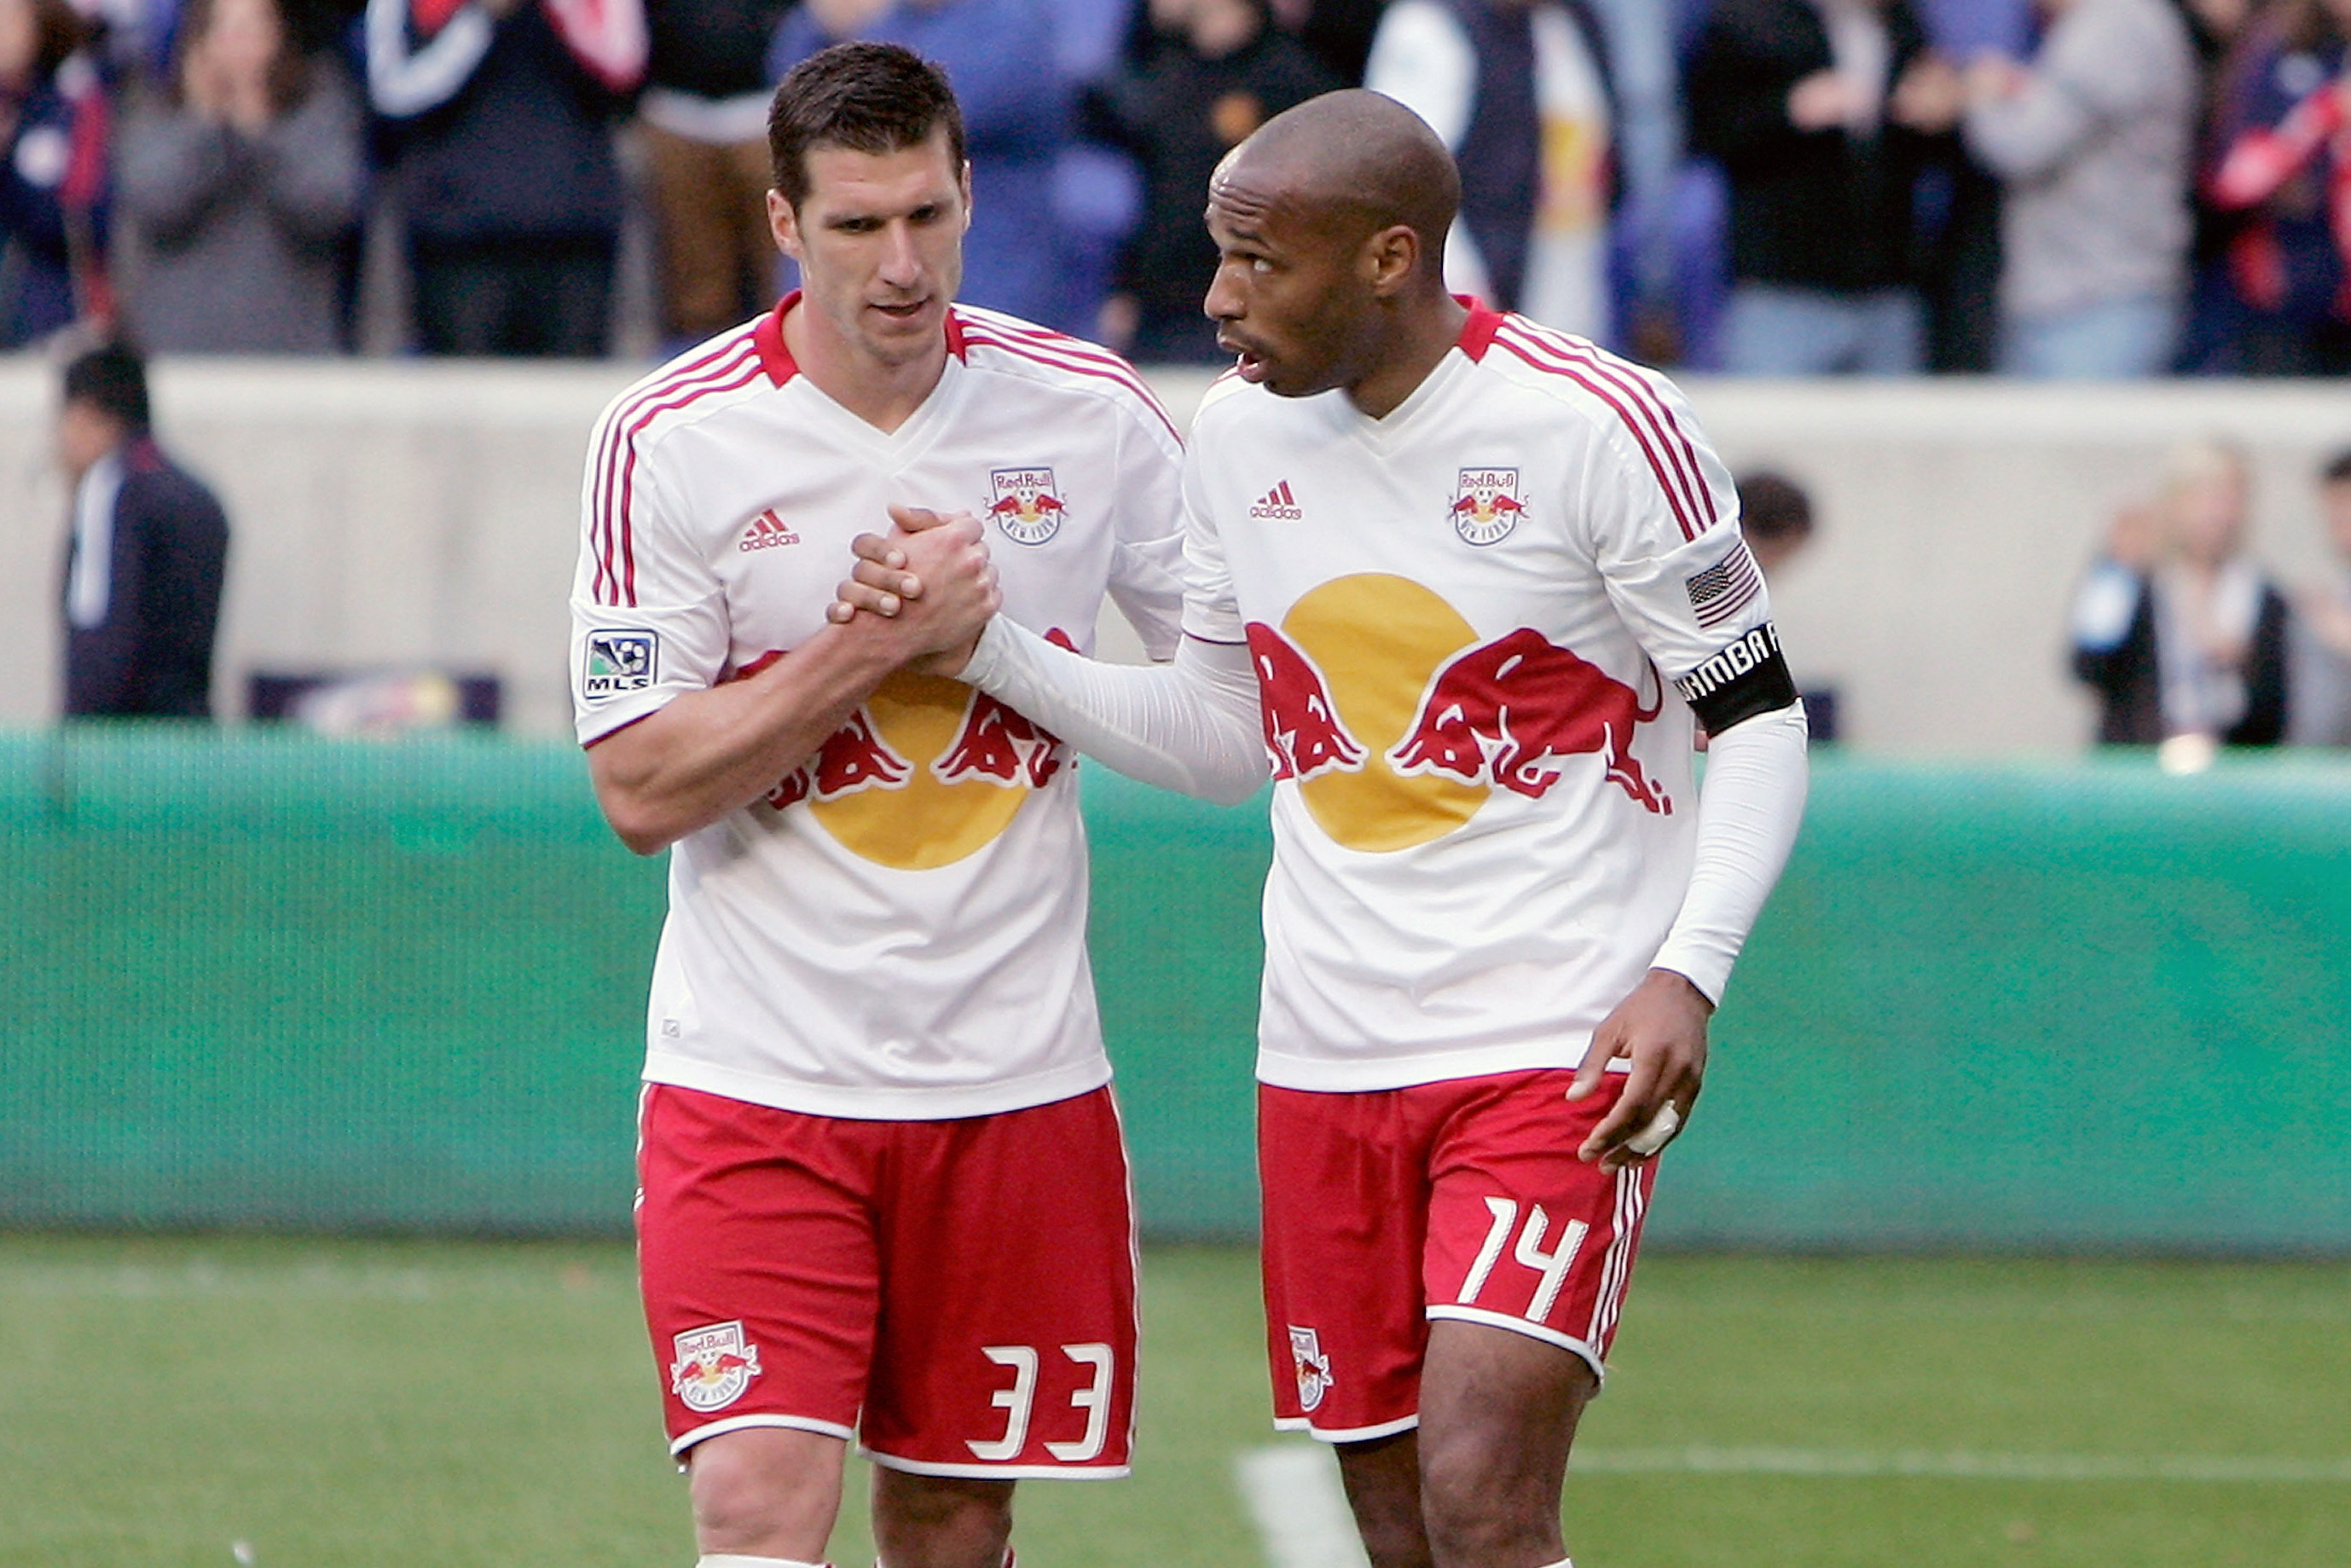 New York Red Bulls vs Colorado Rapids Prediction and Betting Tips